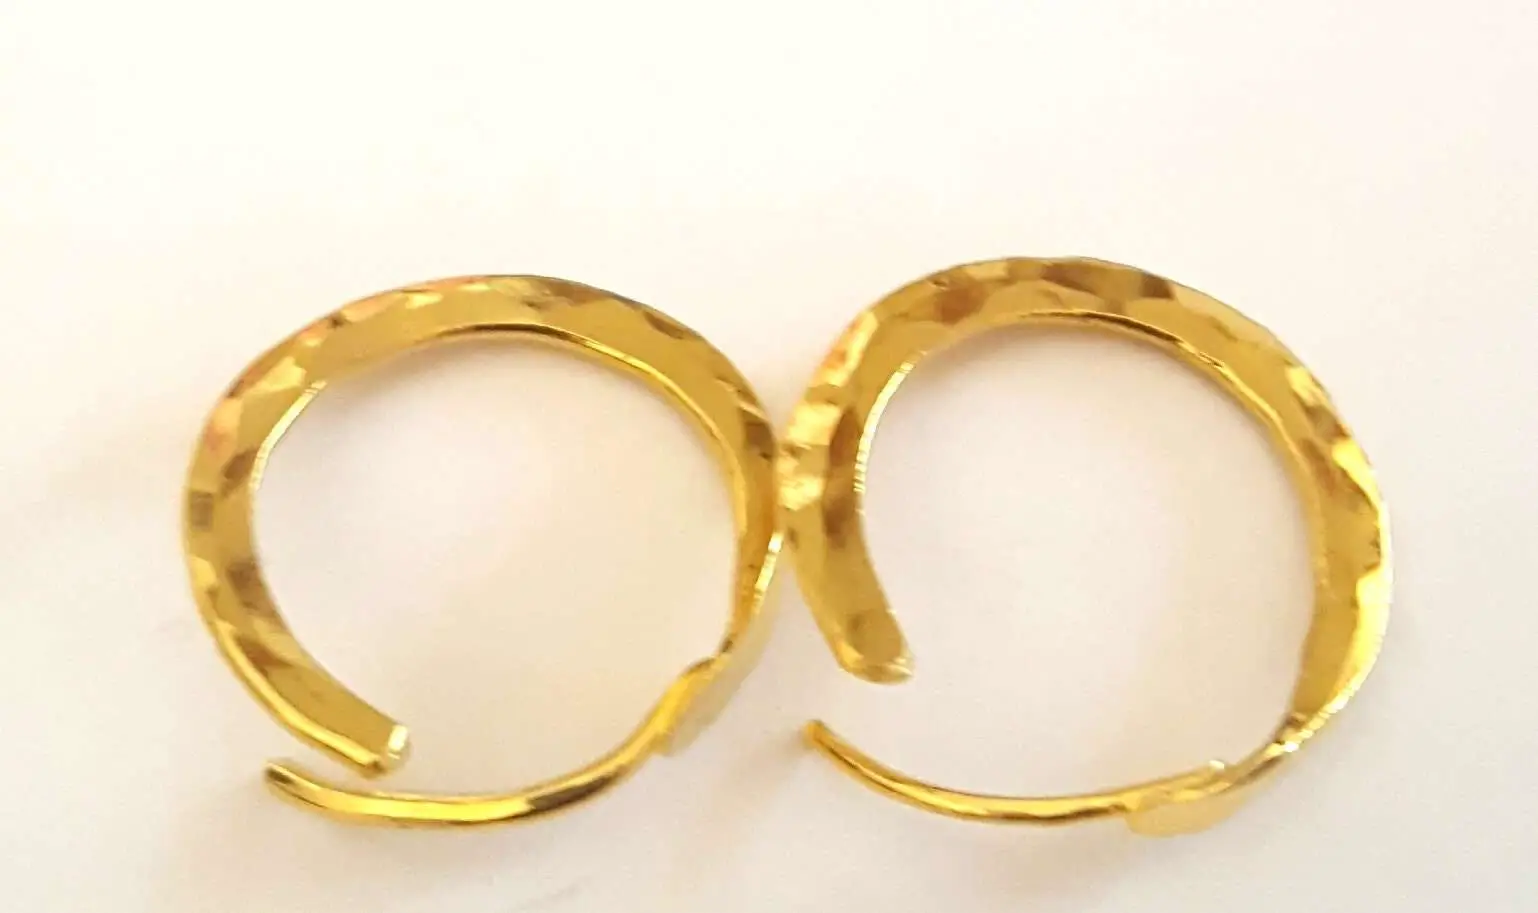 24K Solid Gold Hoop Earrings. 24K Pure Gold Hand Made Hypoallergenic ...